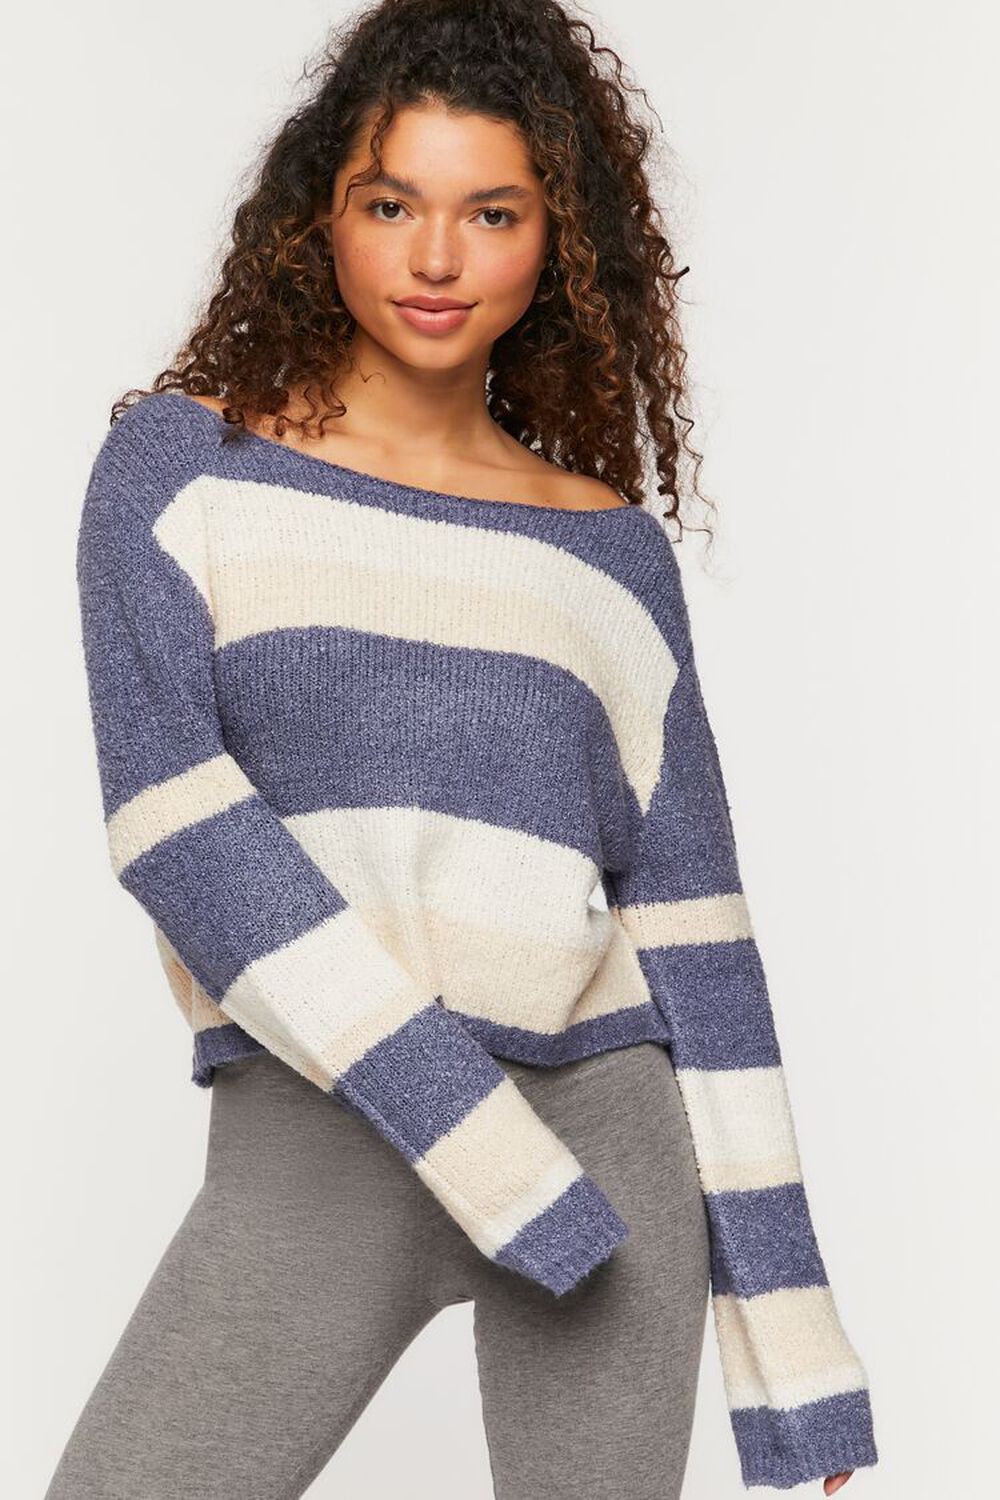 PINK/MULTI Striped Boat Neck Sweater, image 2